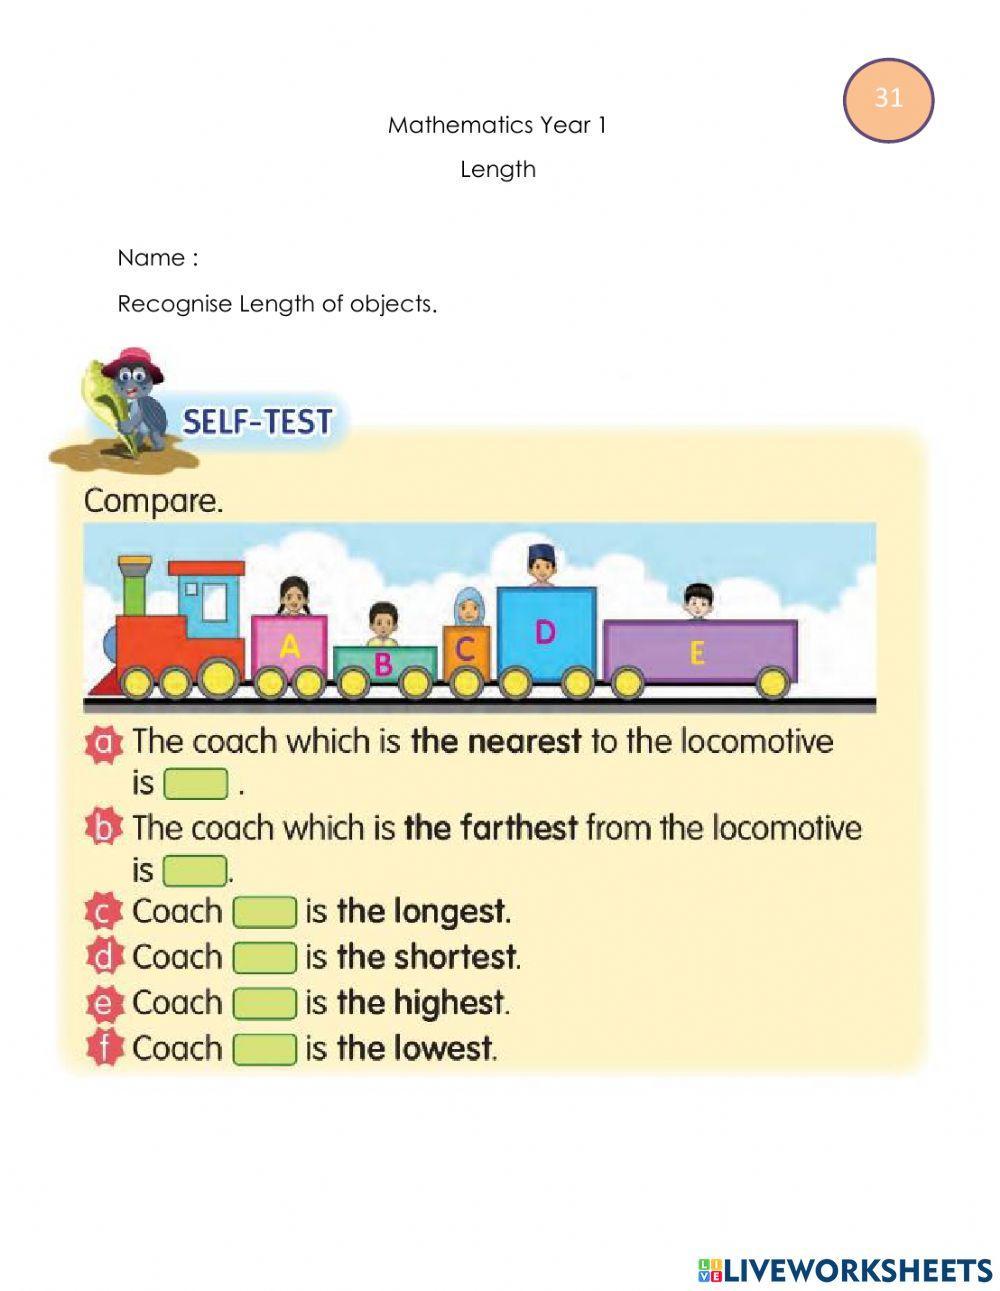 Recognise Length of objects